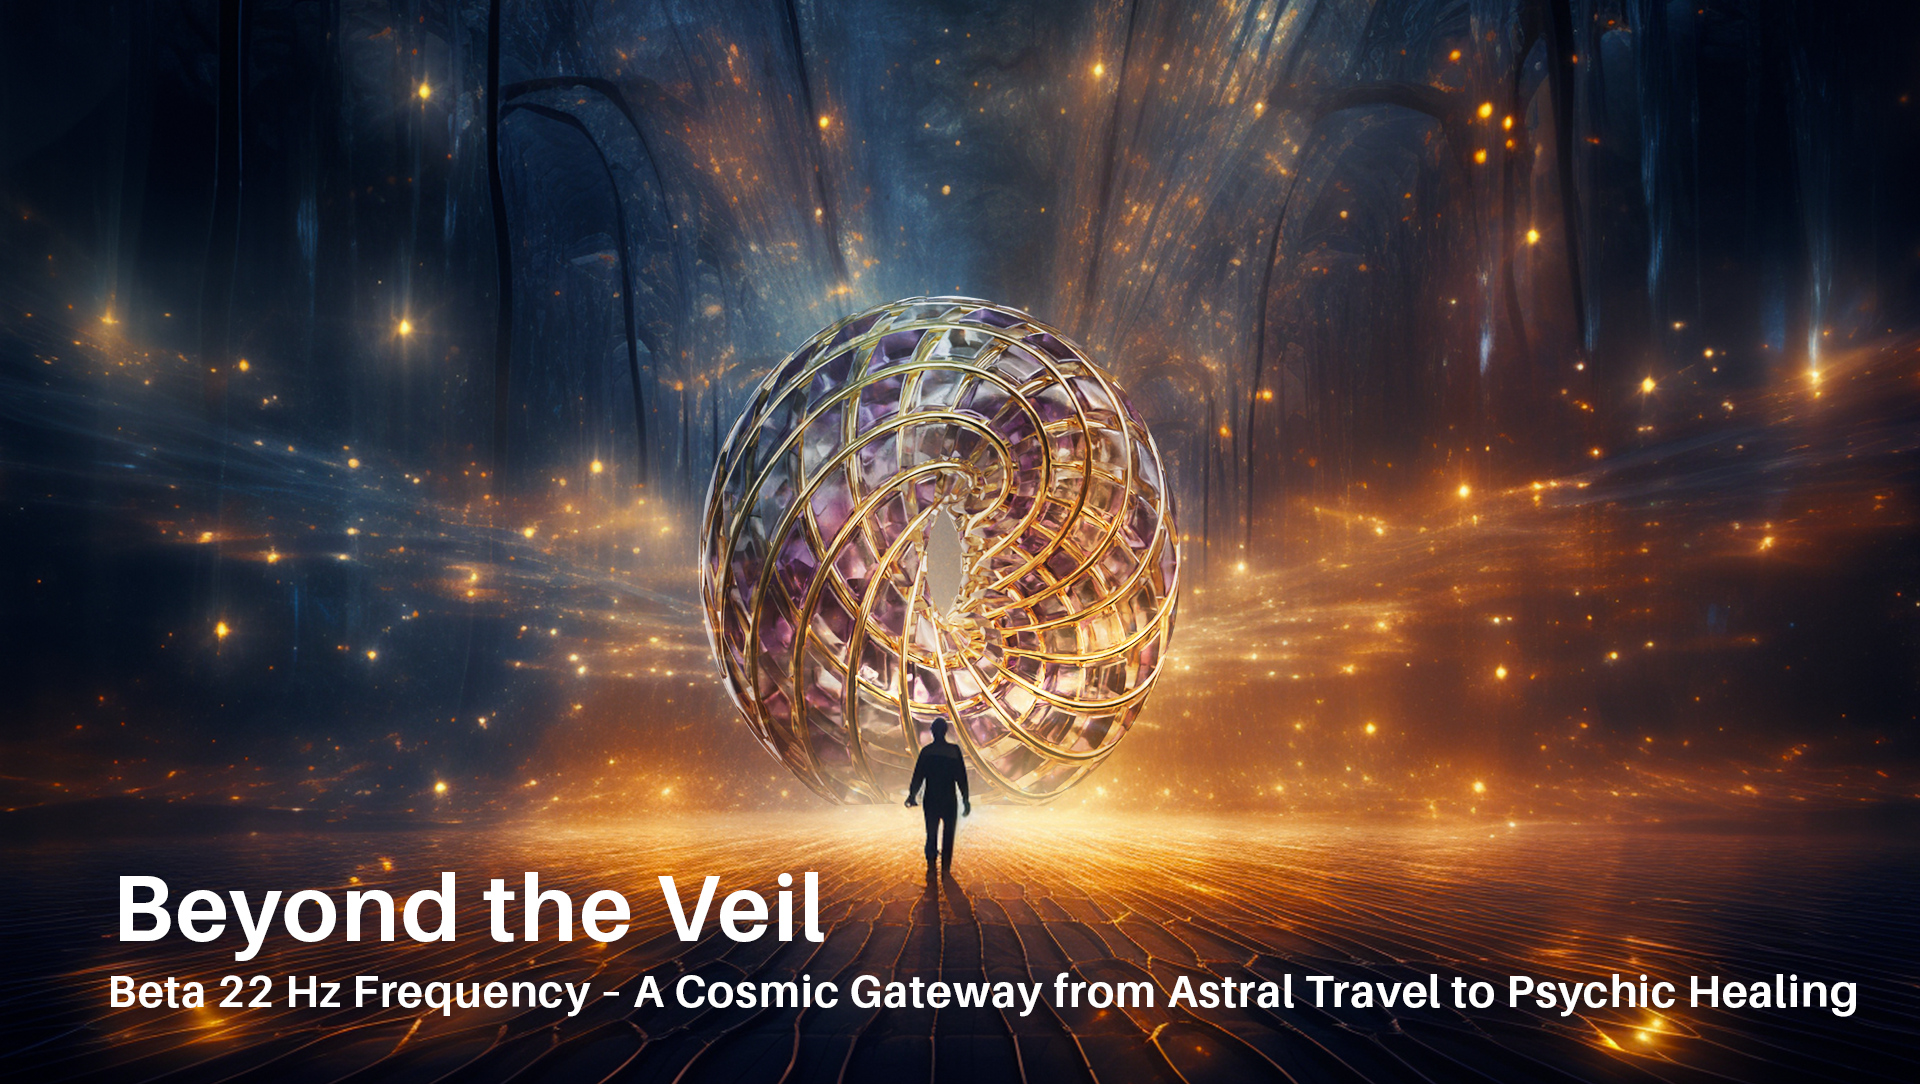 Beyond the Veil: Beta 22 Hz Frequency – A Cosmic Gateway from Astral Travel to Psychic Healing